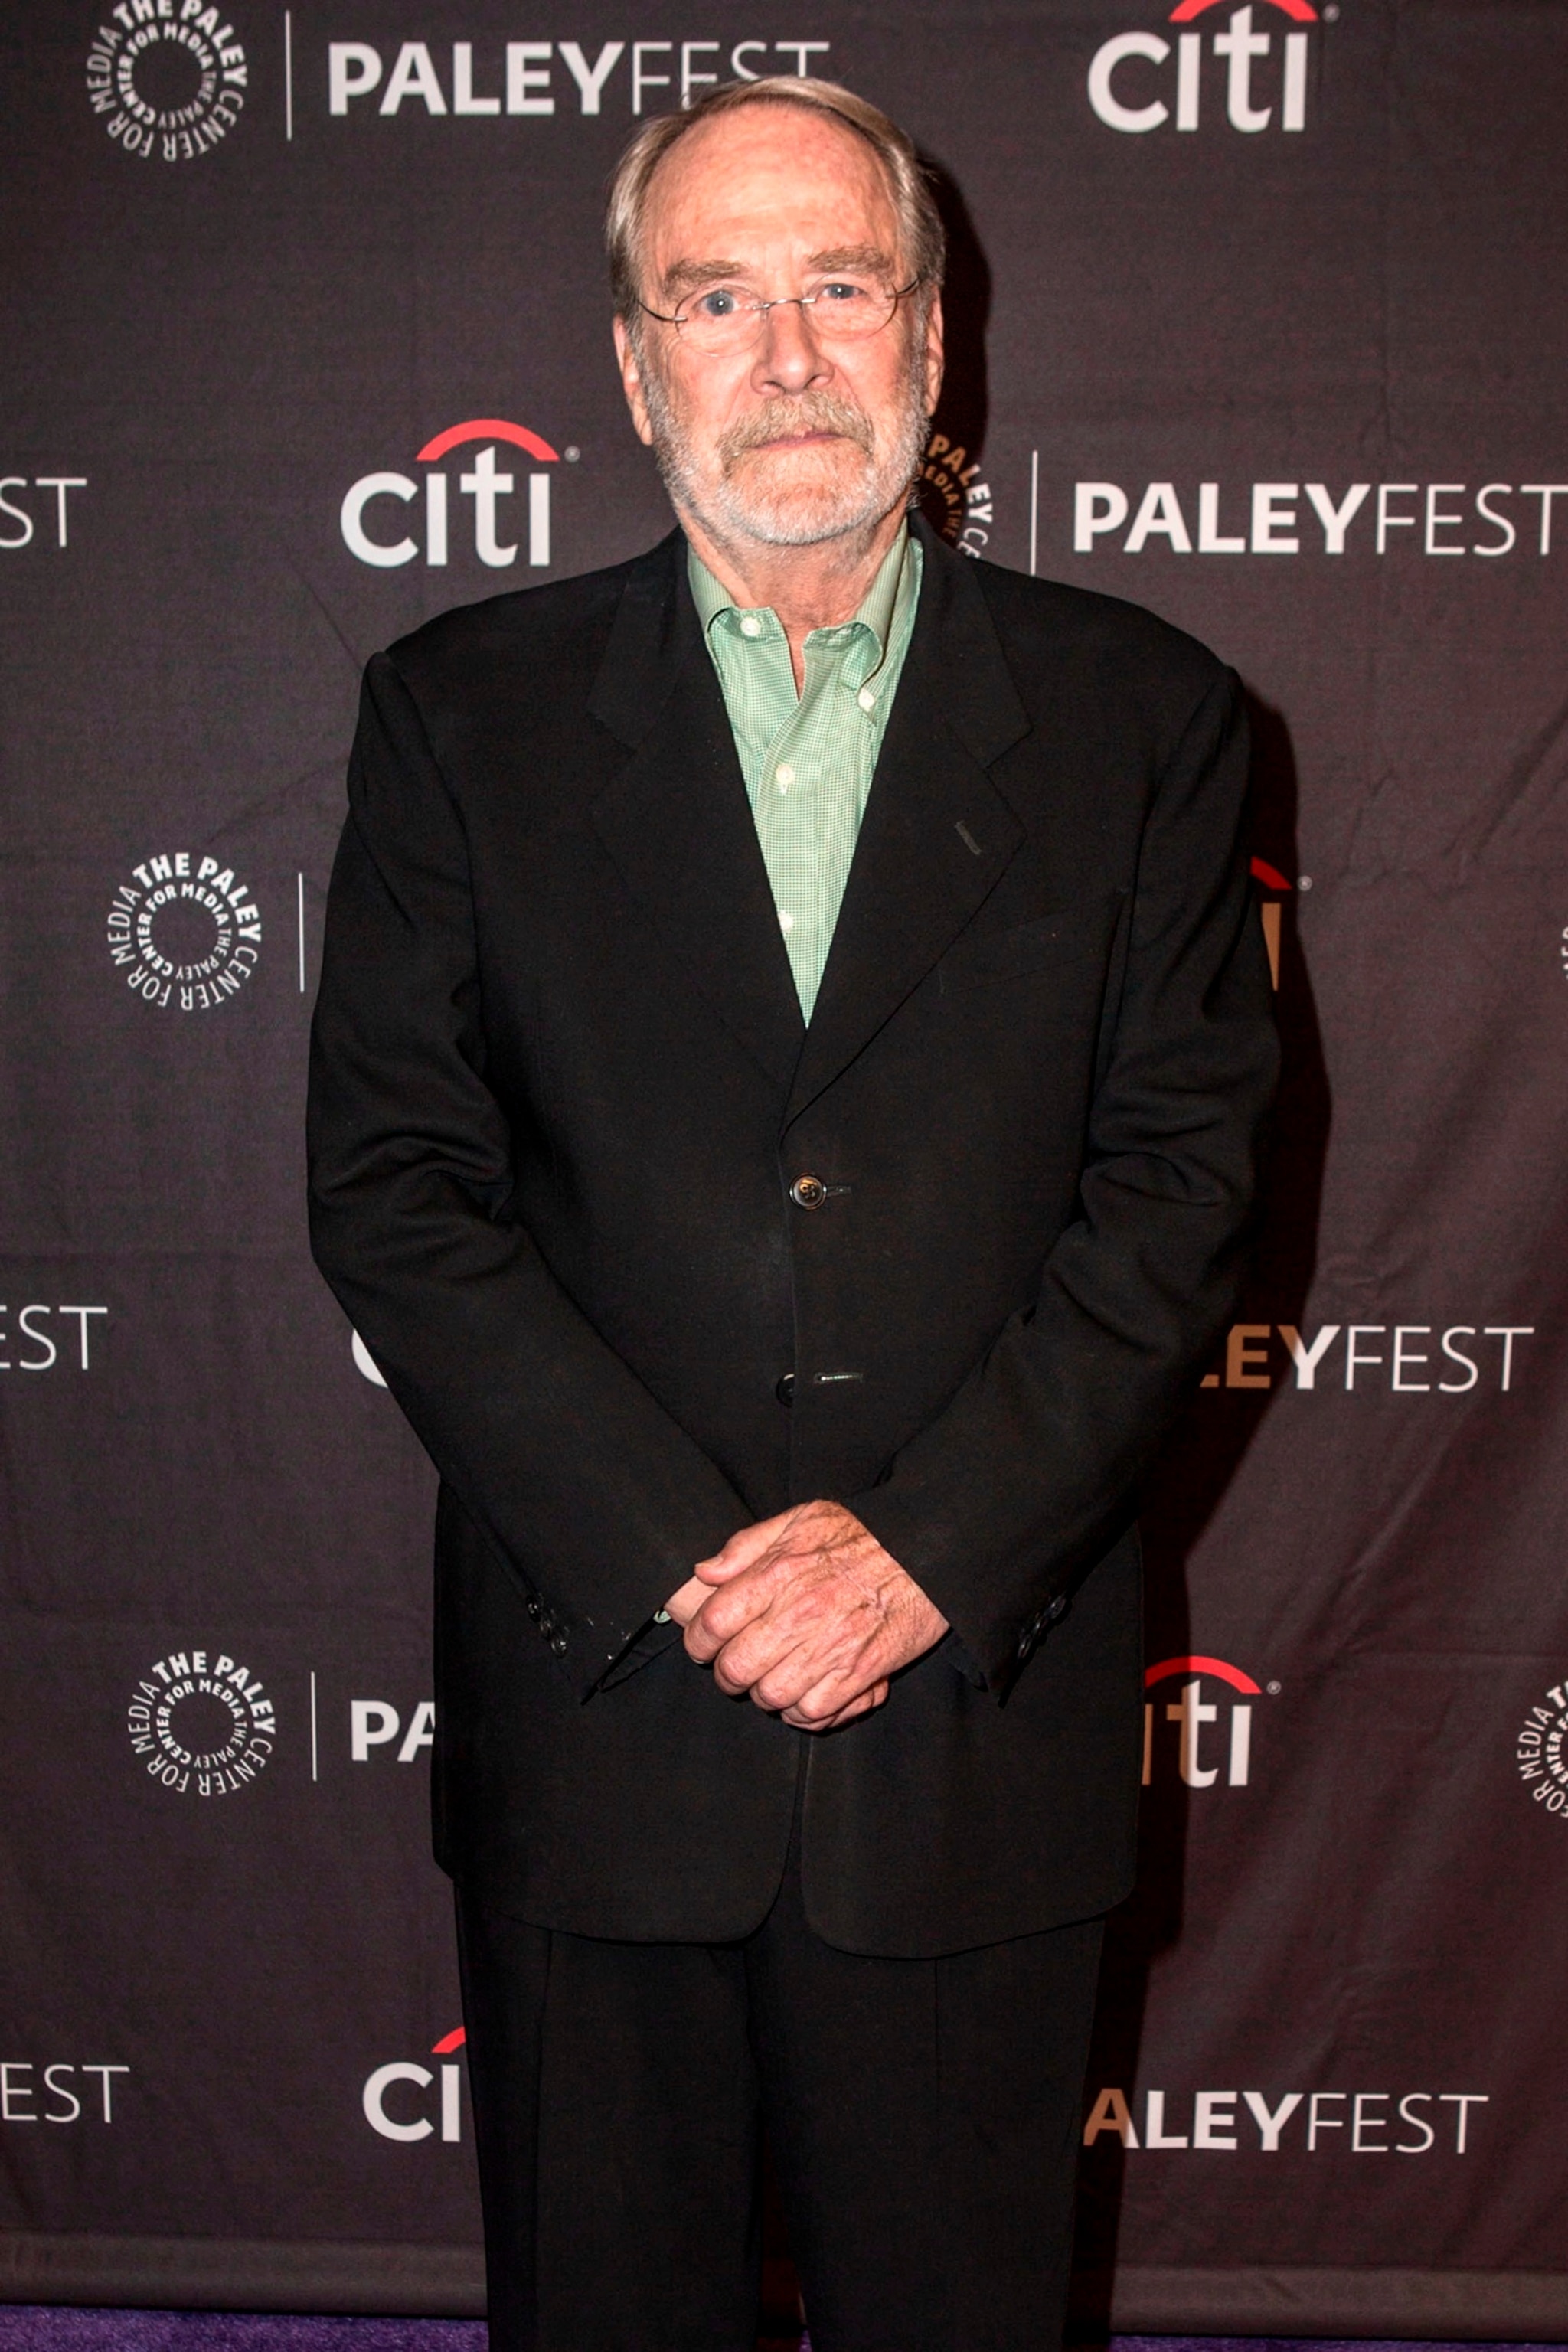 PHOTO: Martin Mull attends The Paley Center For Media's 2018 PaleyFest Fall TV Preview at The Paley Center for Media on September 13, 2018 in Beverly Hills, California.